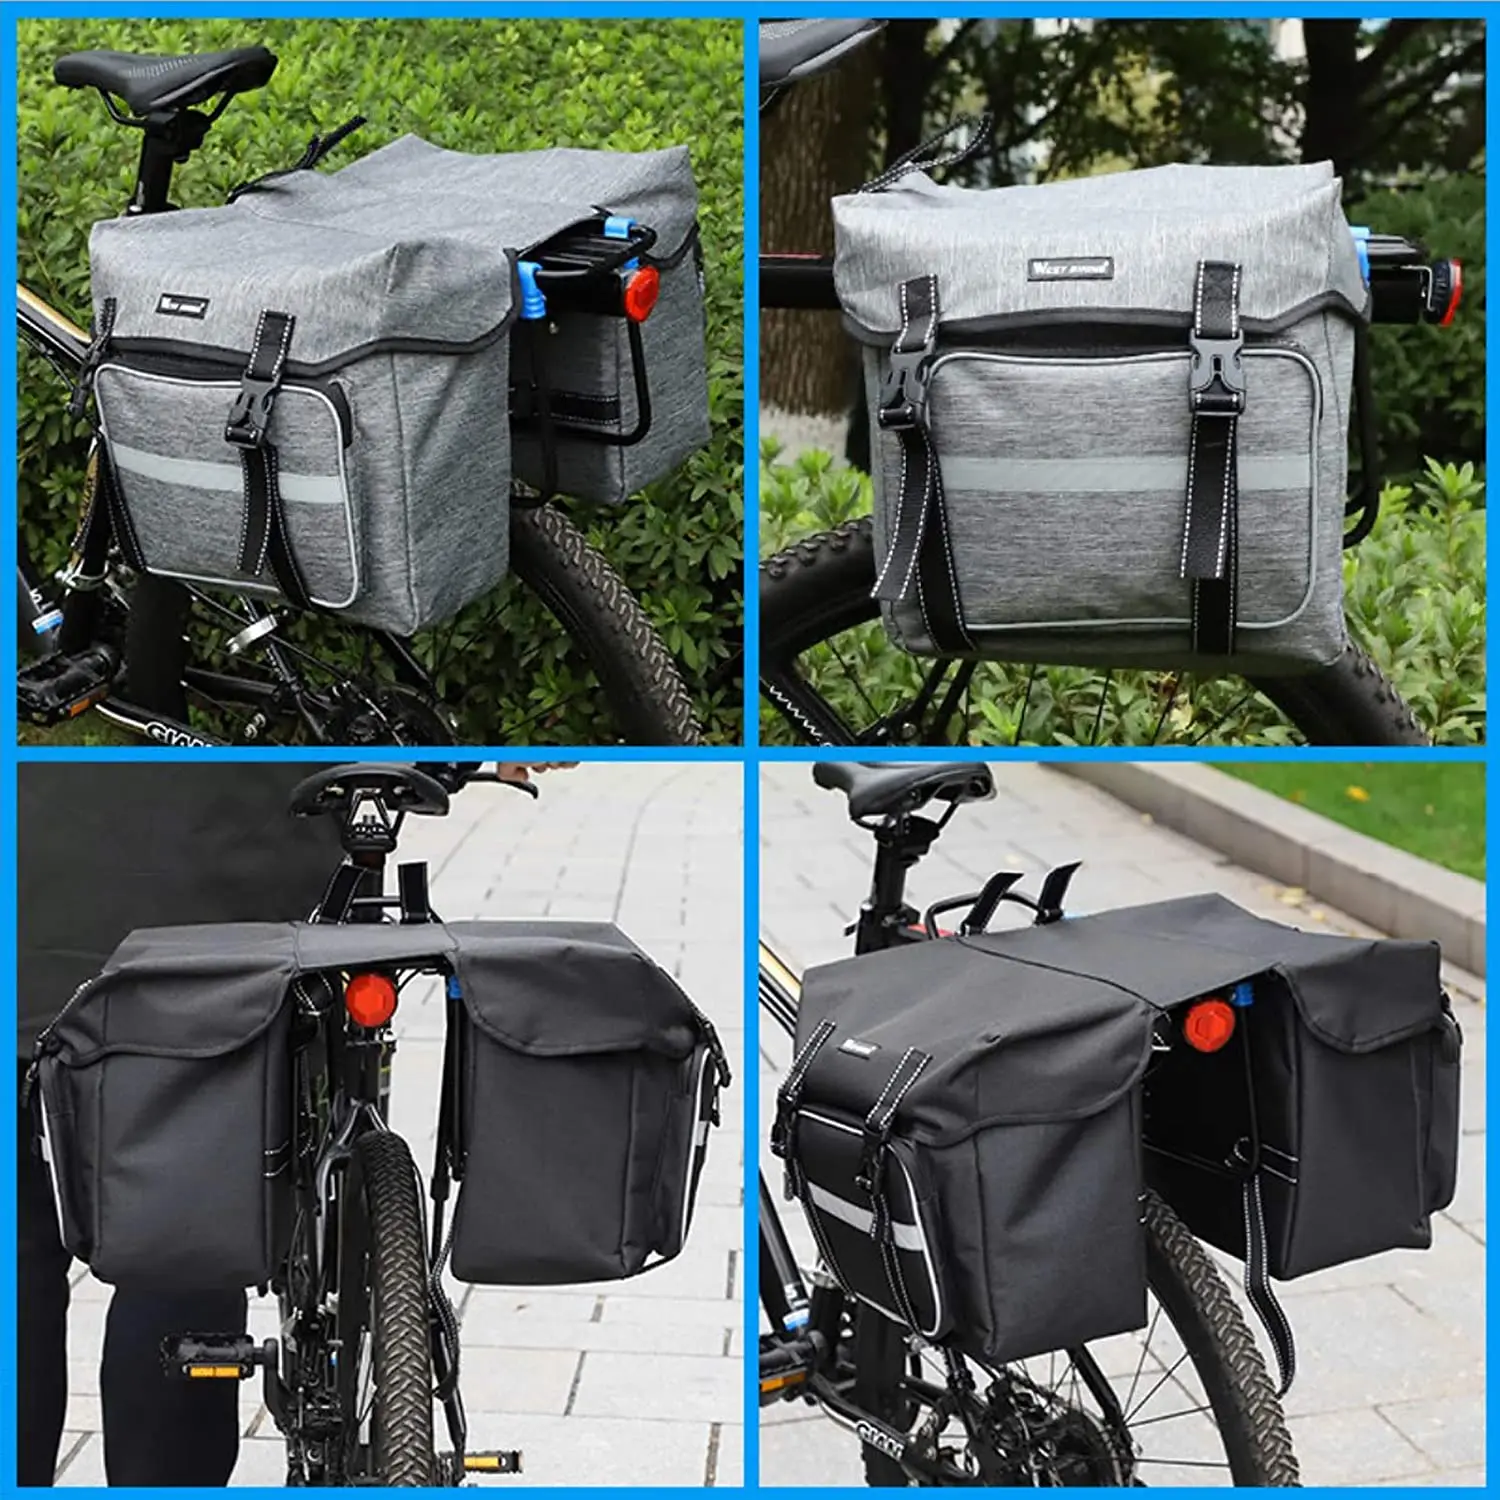 

Bike Rack Trunk Bag Double Pannier Bags Waterproof Bicycle Rear Seat Panniers Pack Cycling Rack Trunk Bags 25/30L and Rain Cover